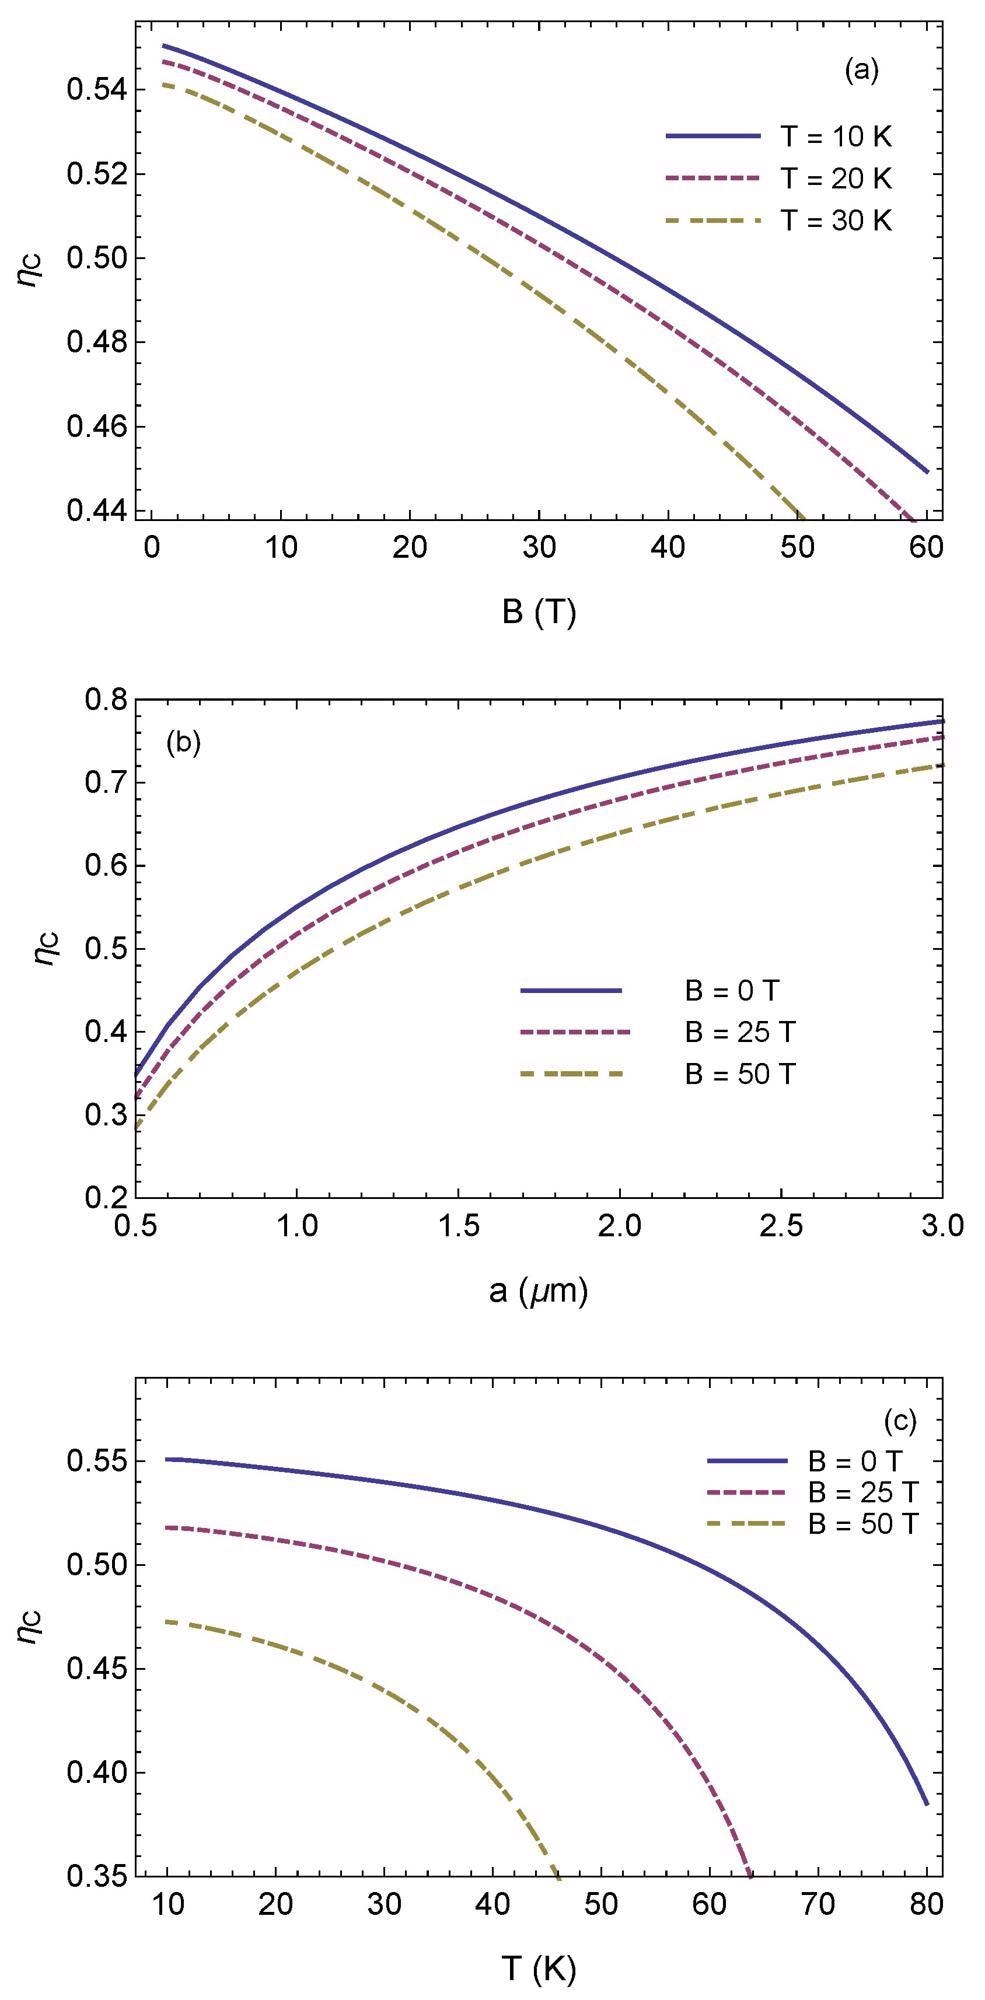 (Color online) Dependence of normalized Casimir force between YBCO plates in the mixed state on (a) magnetic field, (b) separation distance, and (c) temperature.